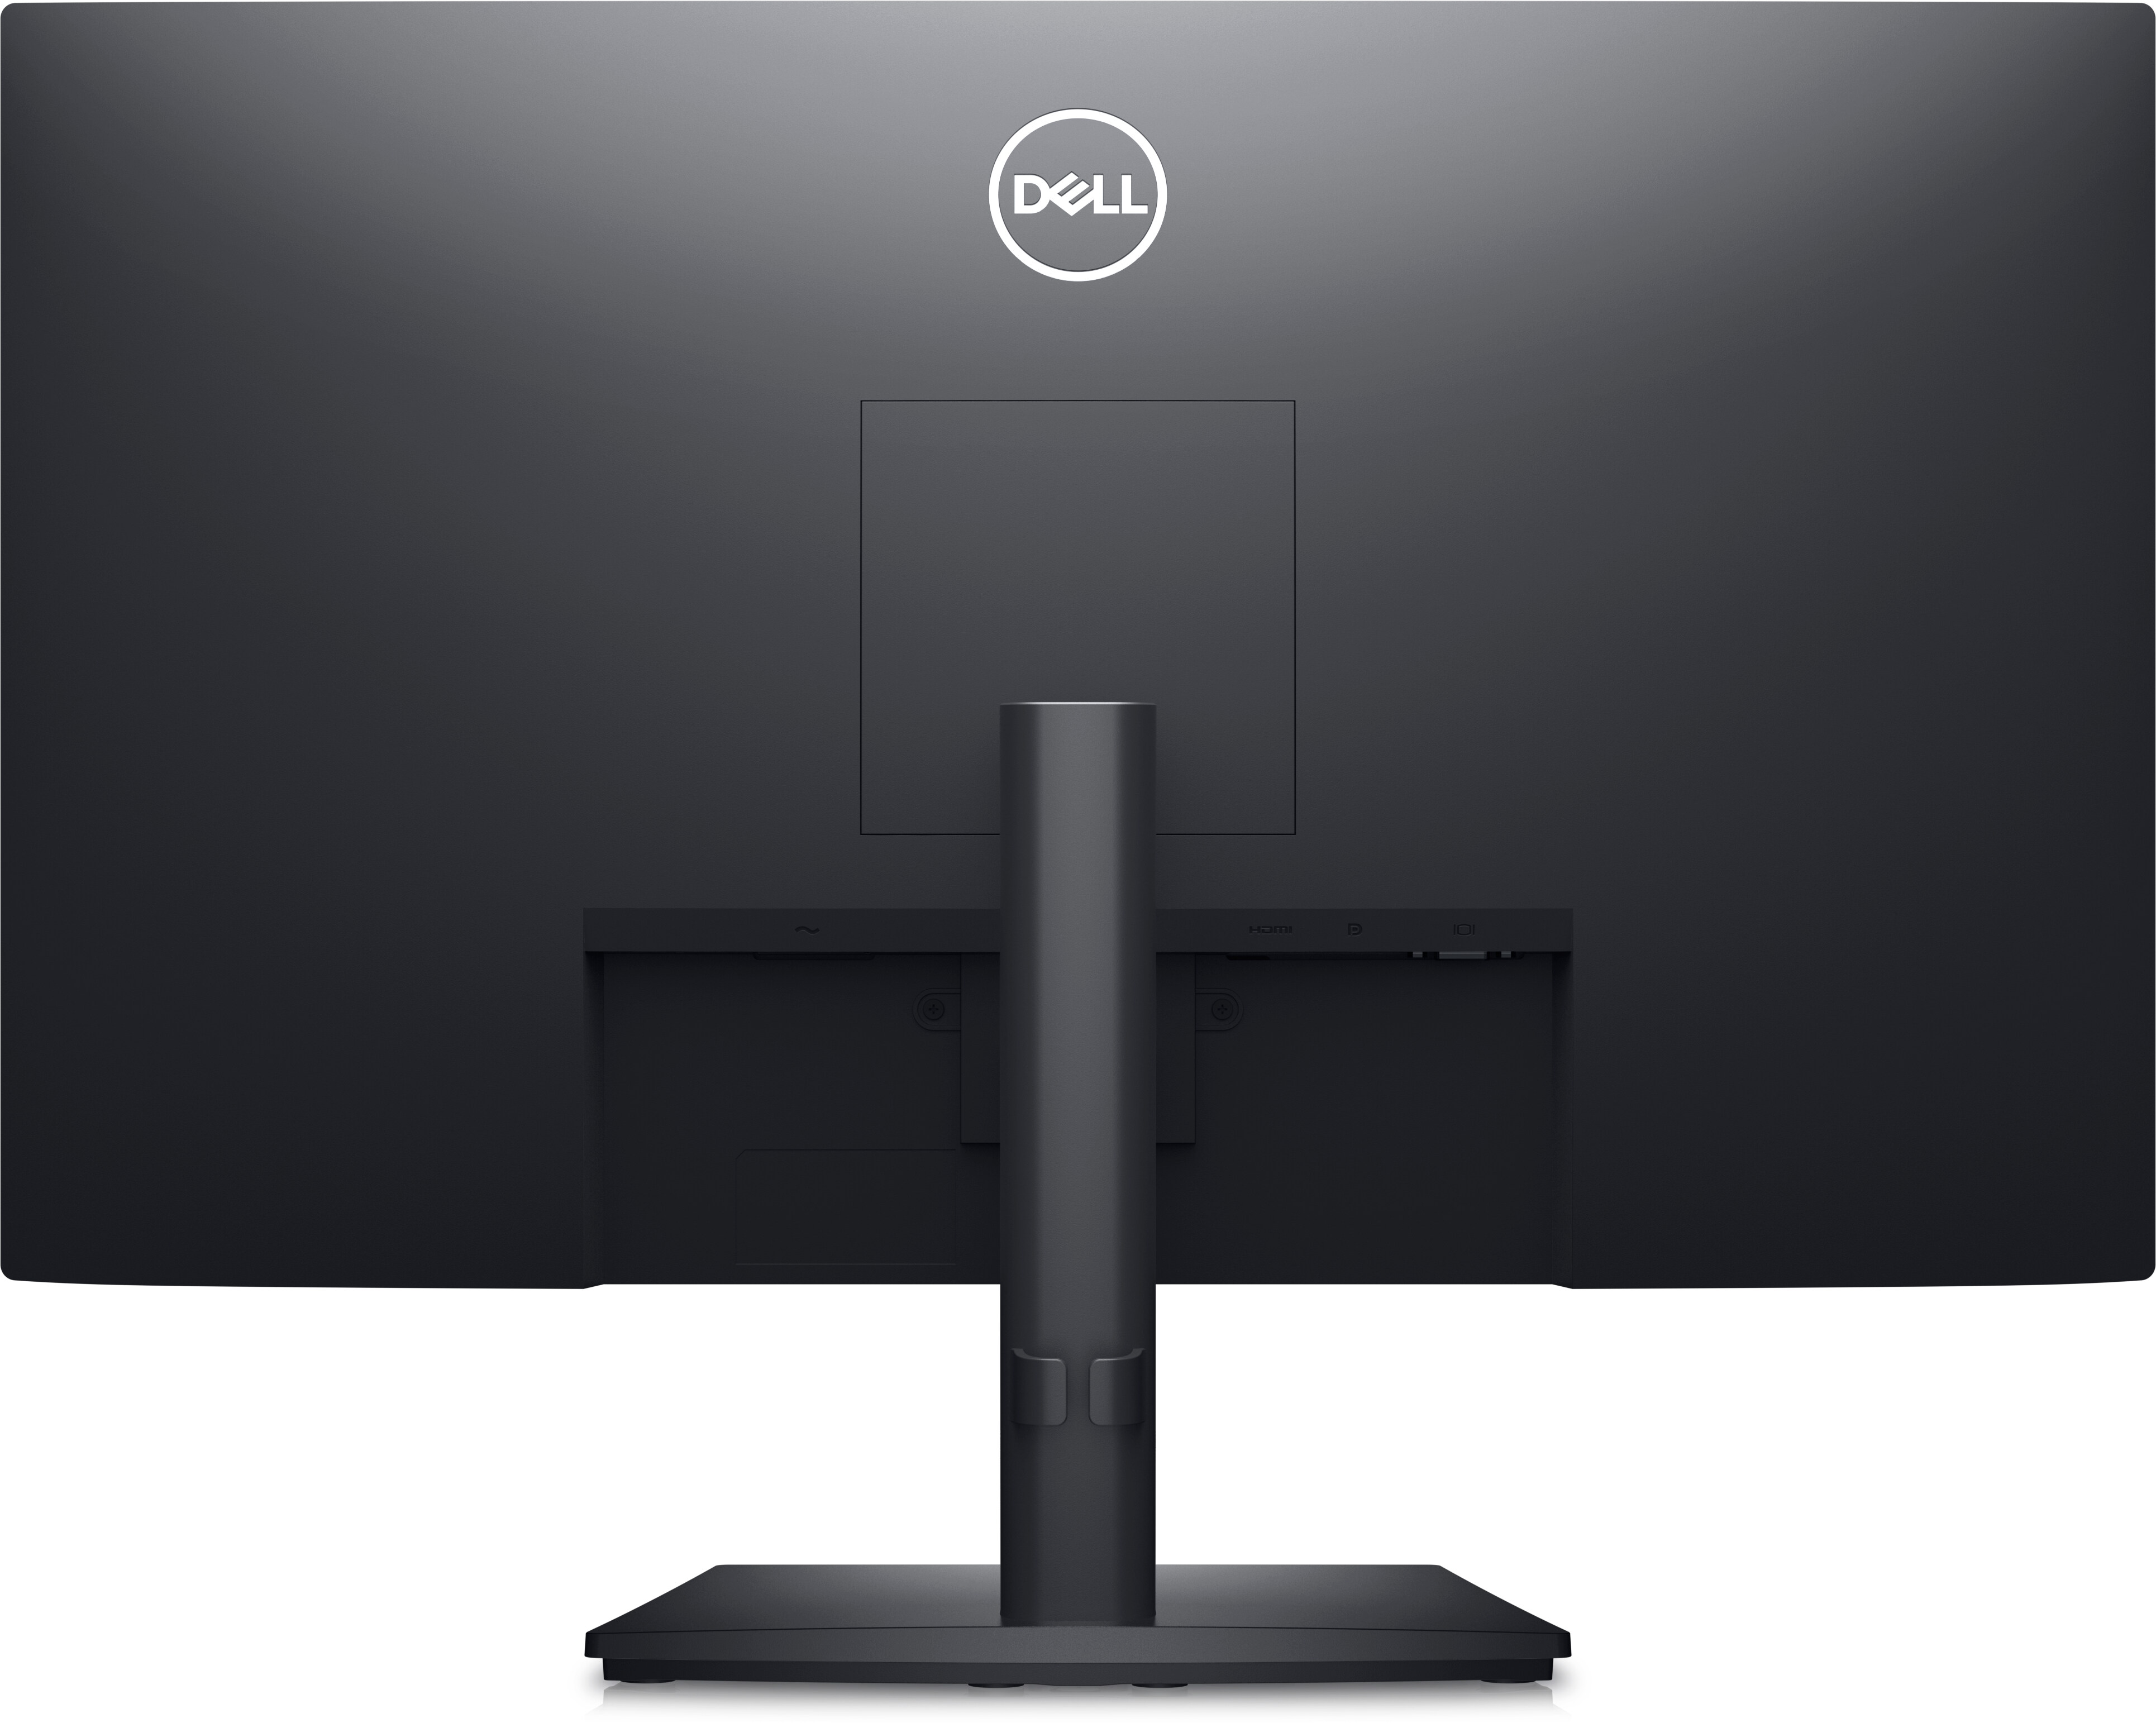 Dell 27-Inch Full HD 1920 x 1080 IPS Backlit LED Widescreen Monitor with  AMD FreeSync Technology, VGA and HDMI Inputs, Black